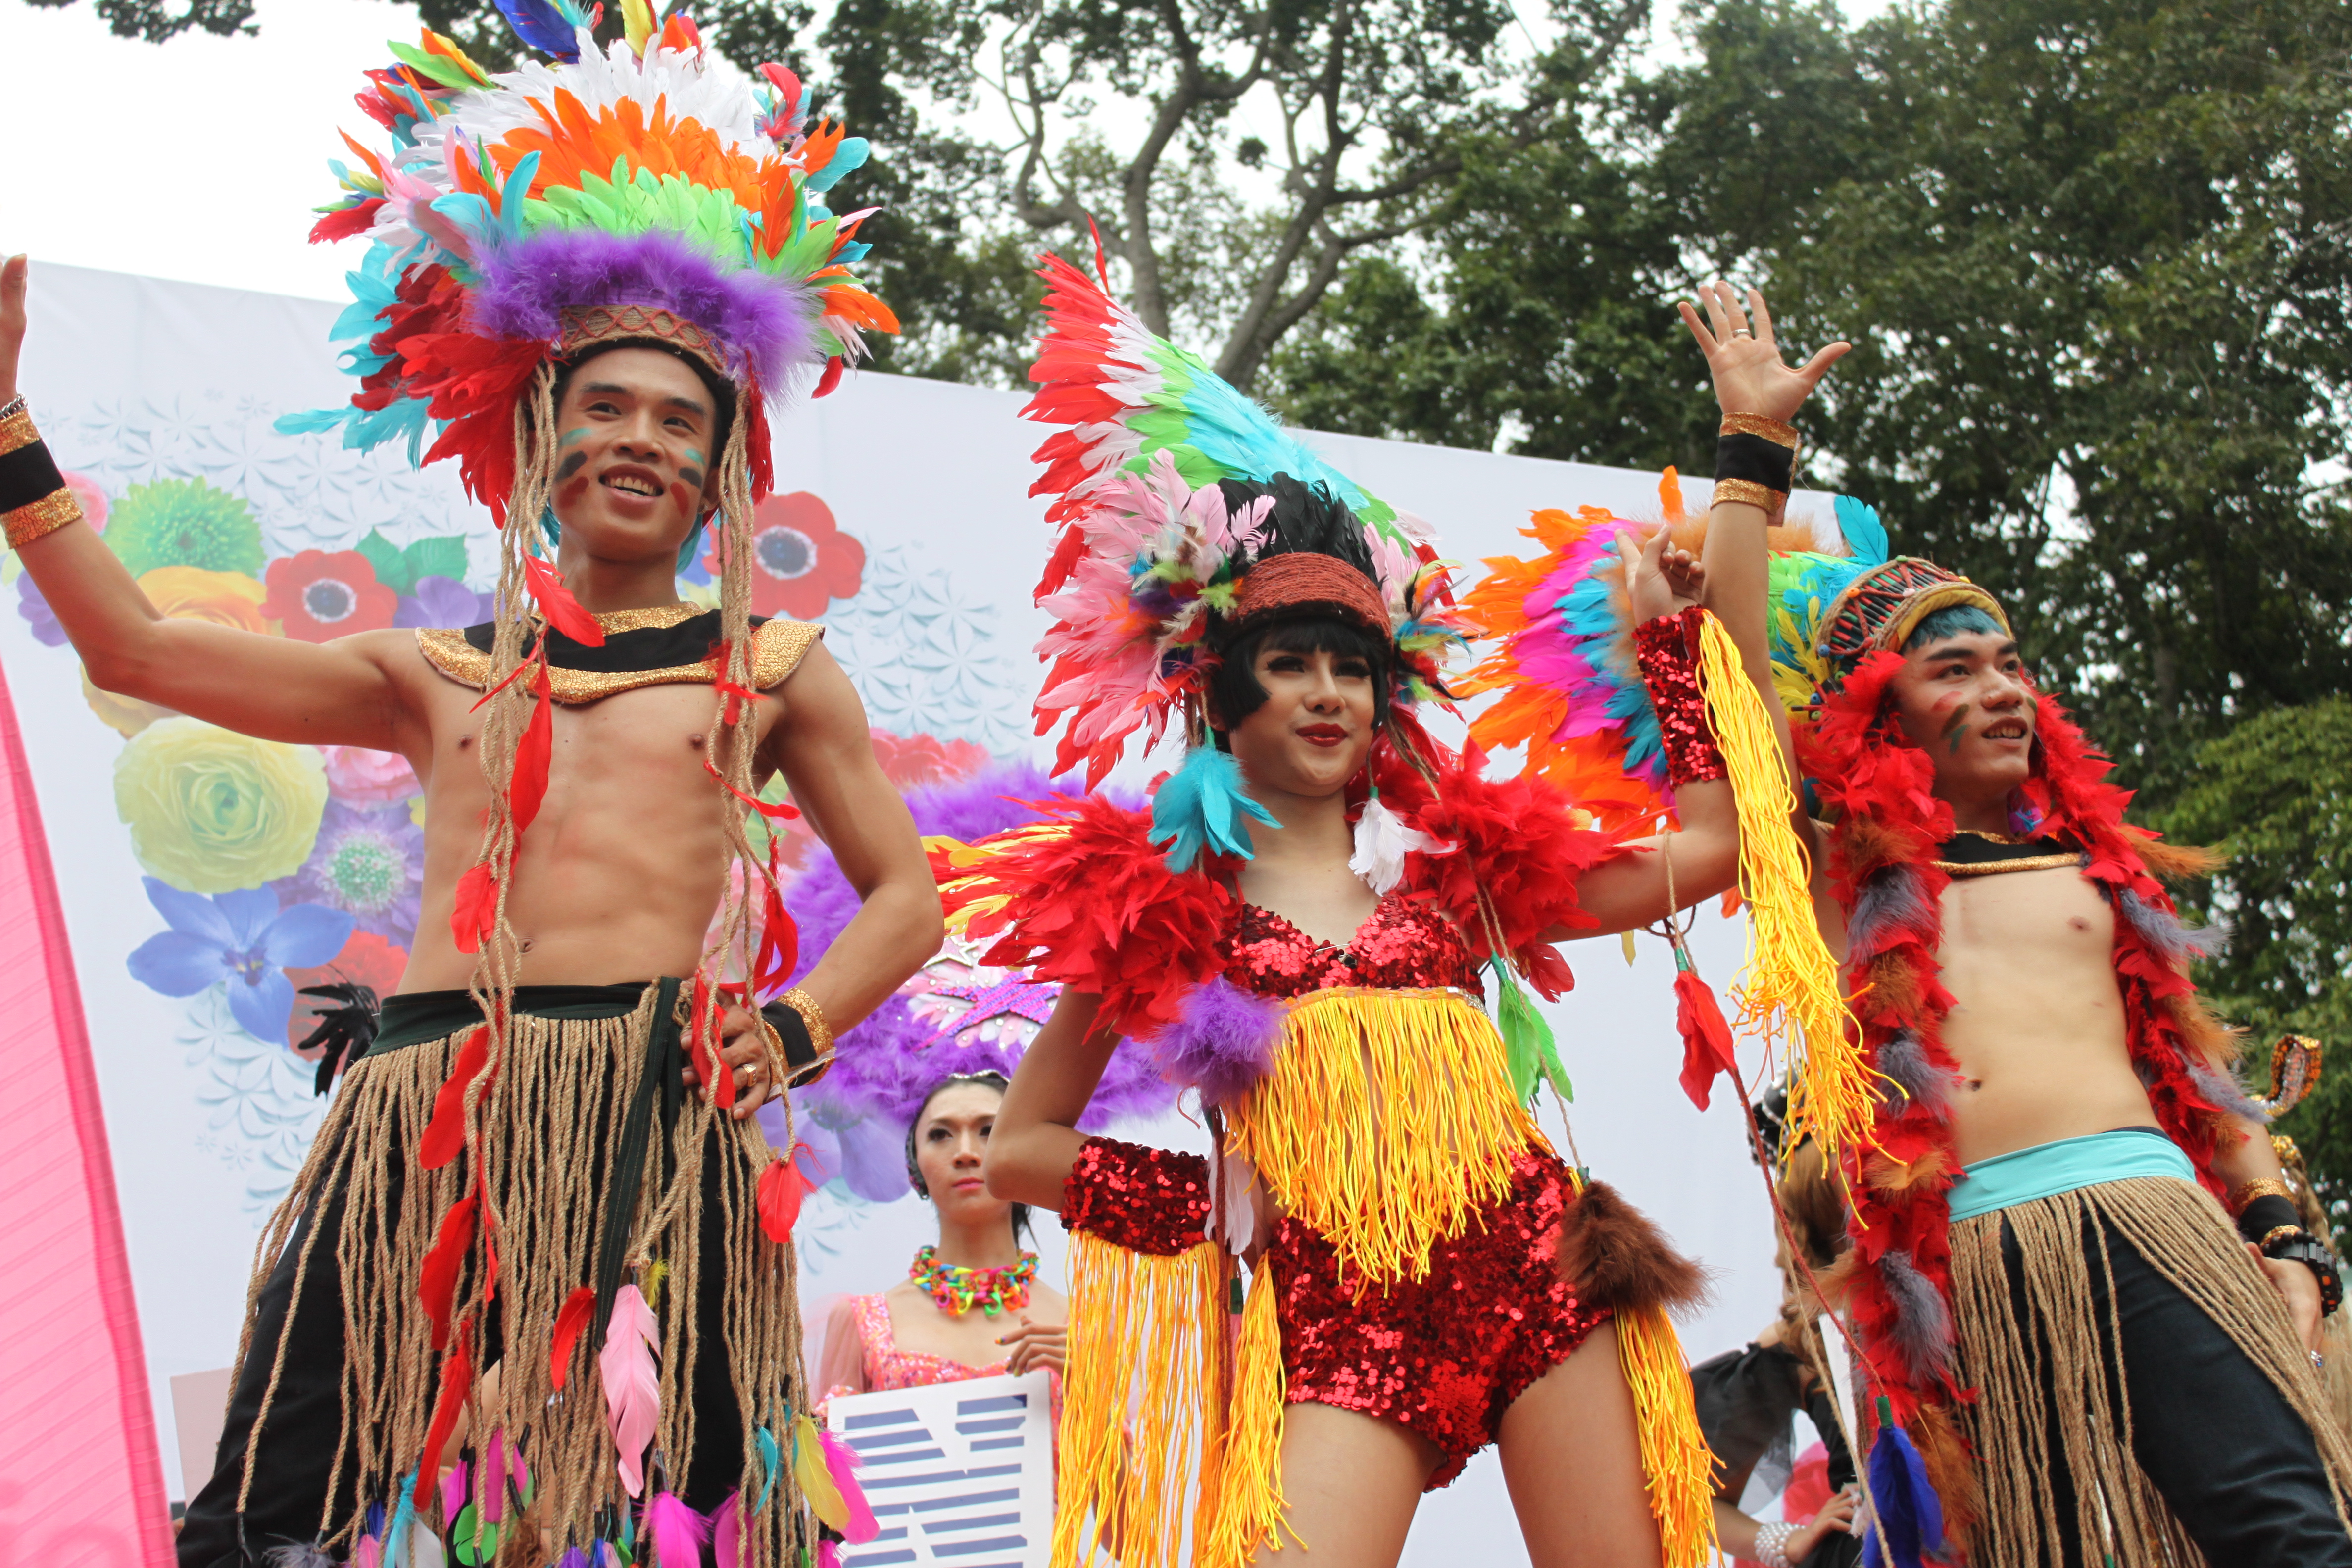 Over 2,000 people attend event for LGBT community in Vietnam hub